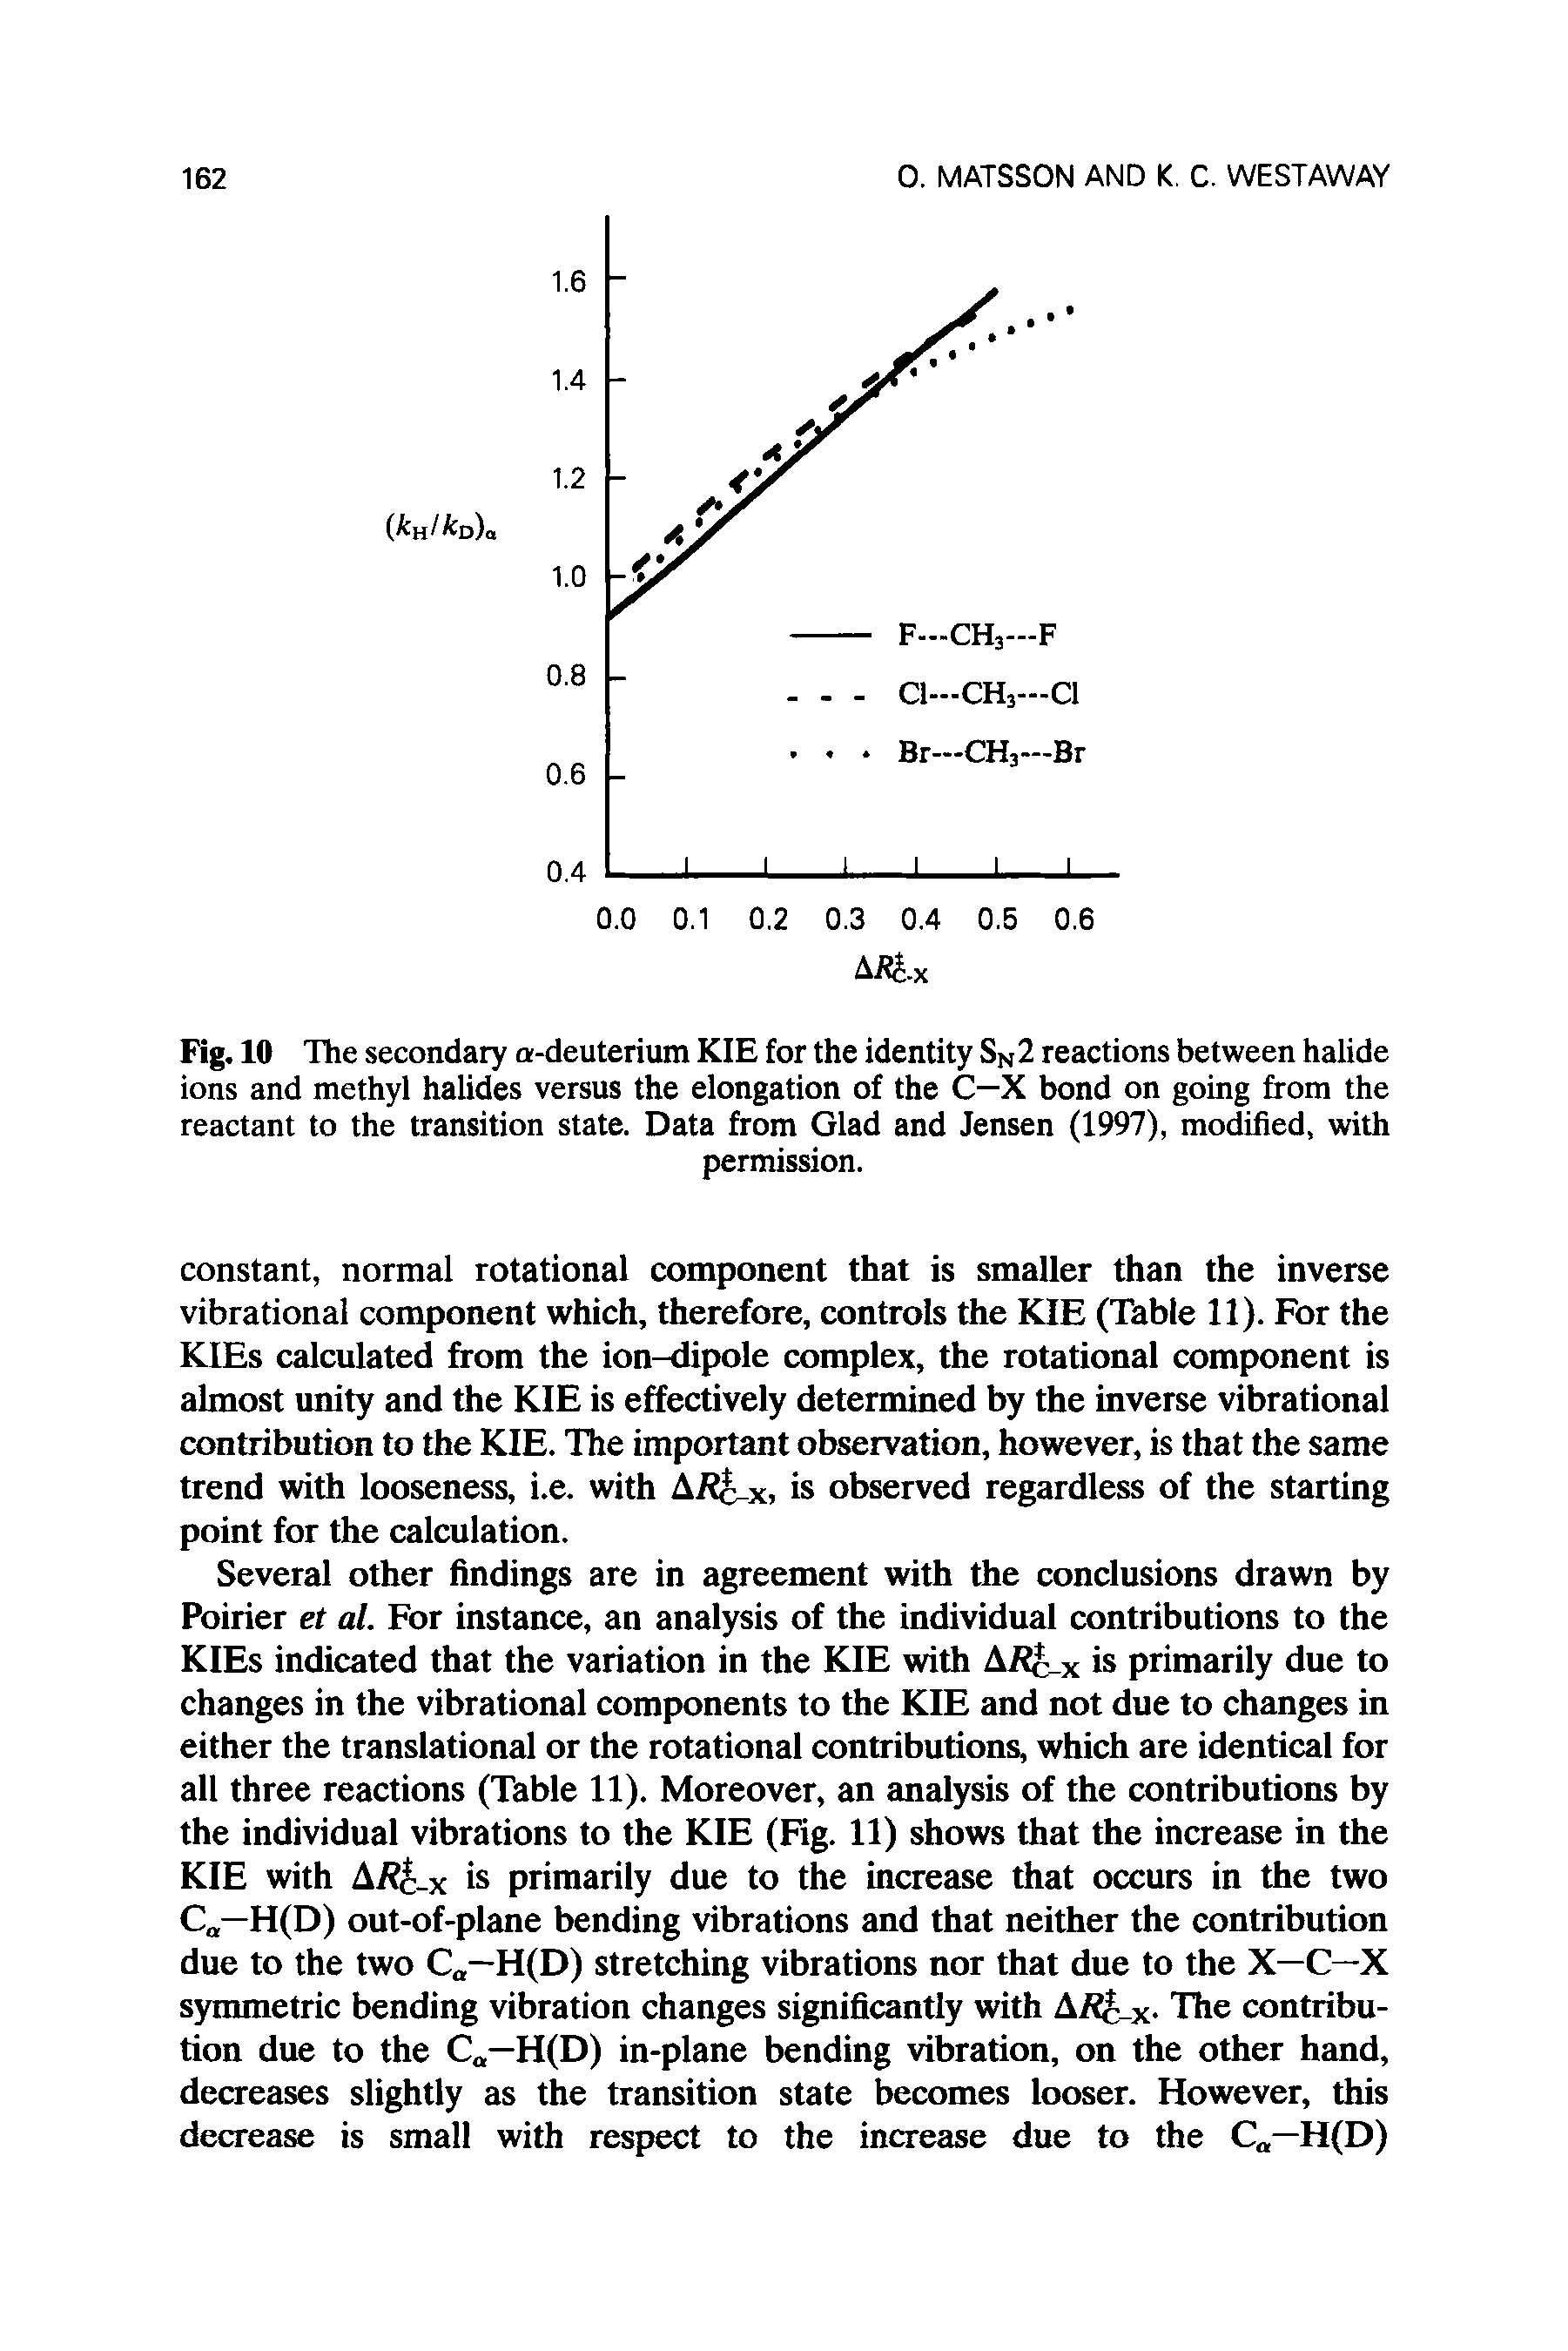 Fig. 10 The secondary a-deuterium KIE for the identity SN2 reactions between halide ions and methyl halides versus the elongation of the C—X bond on going from the reactant to the transition state. Data from Glad and Jensen (1997), modified, with...